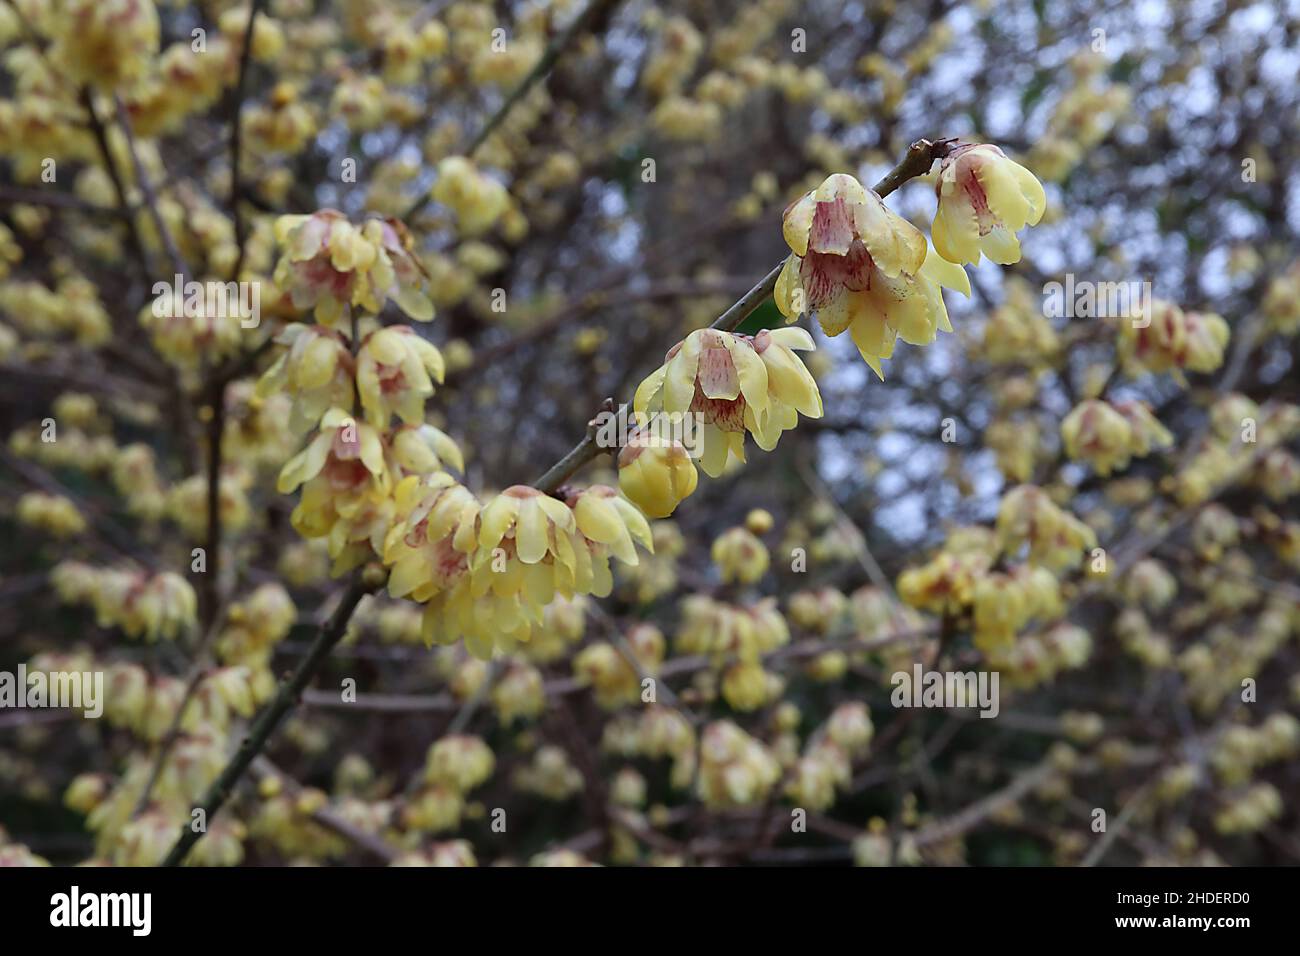 Chimonanthus praecox  wintersweet – transparent highly scented yellow flowers on bare branches,  January, England, UK Stock Photo